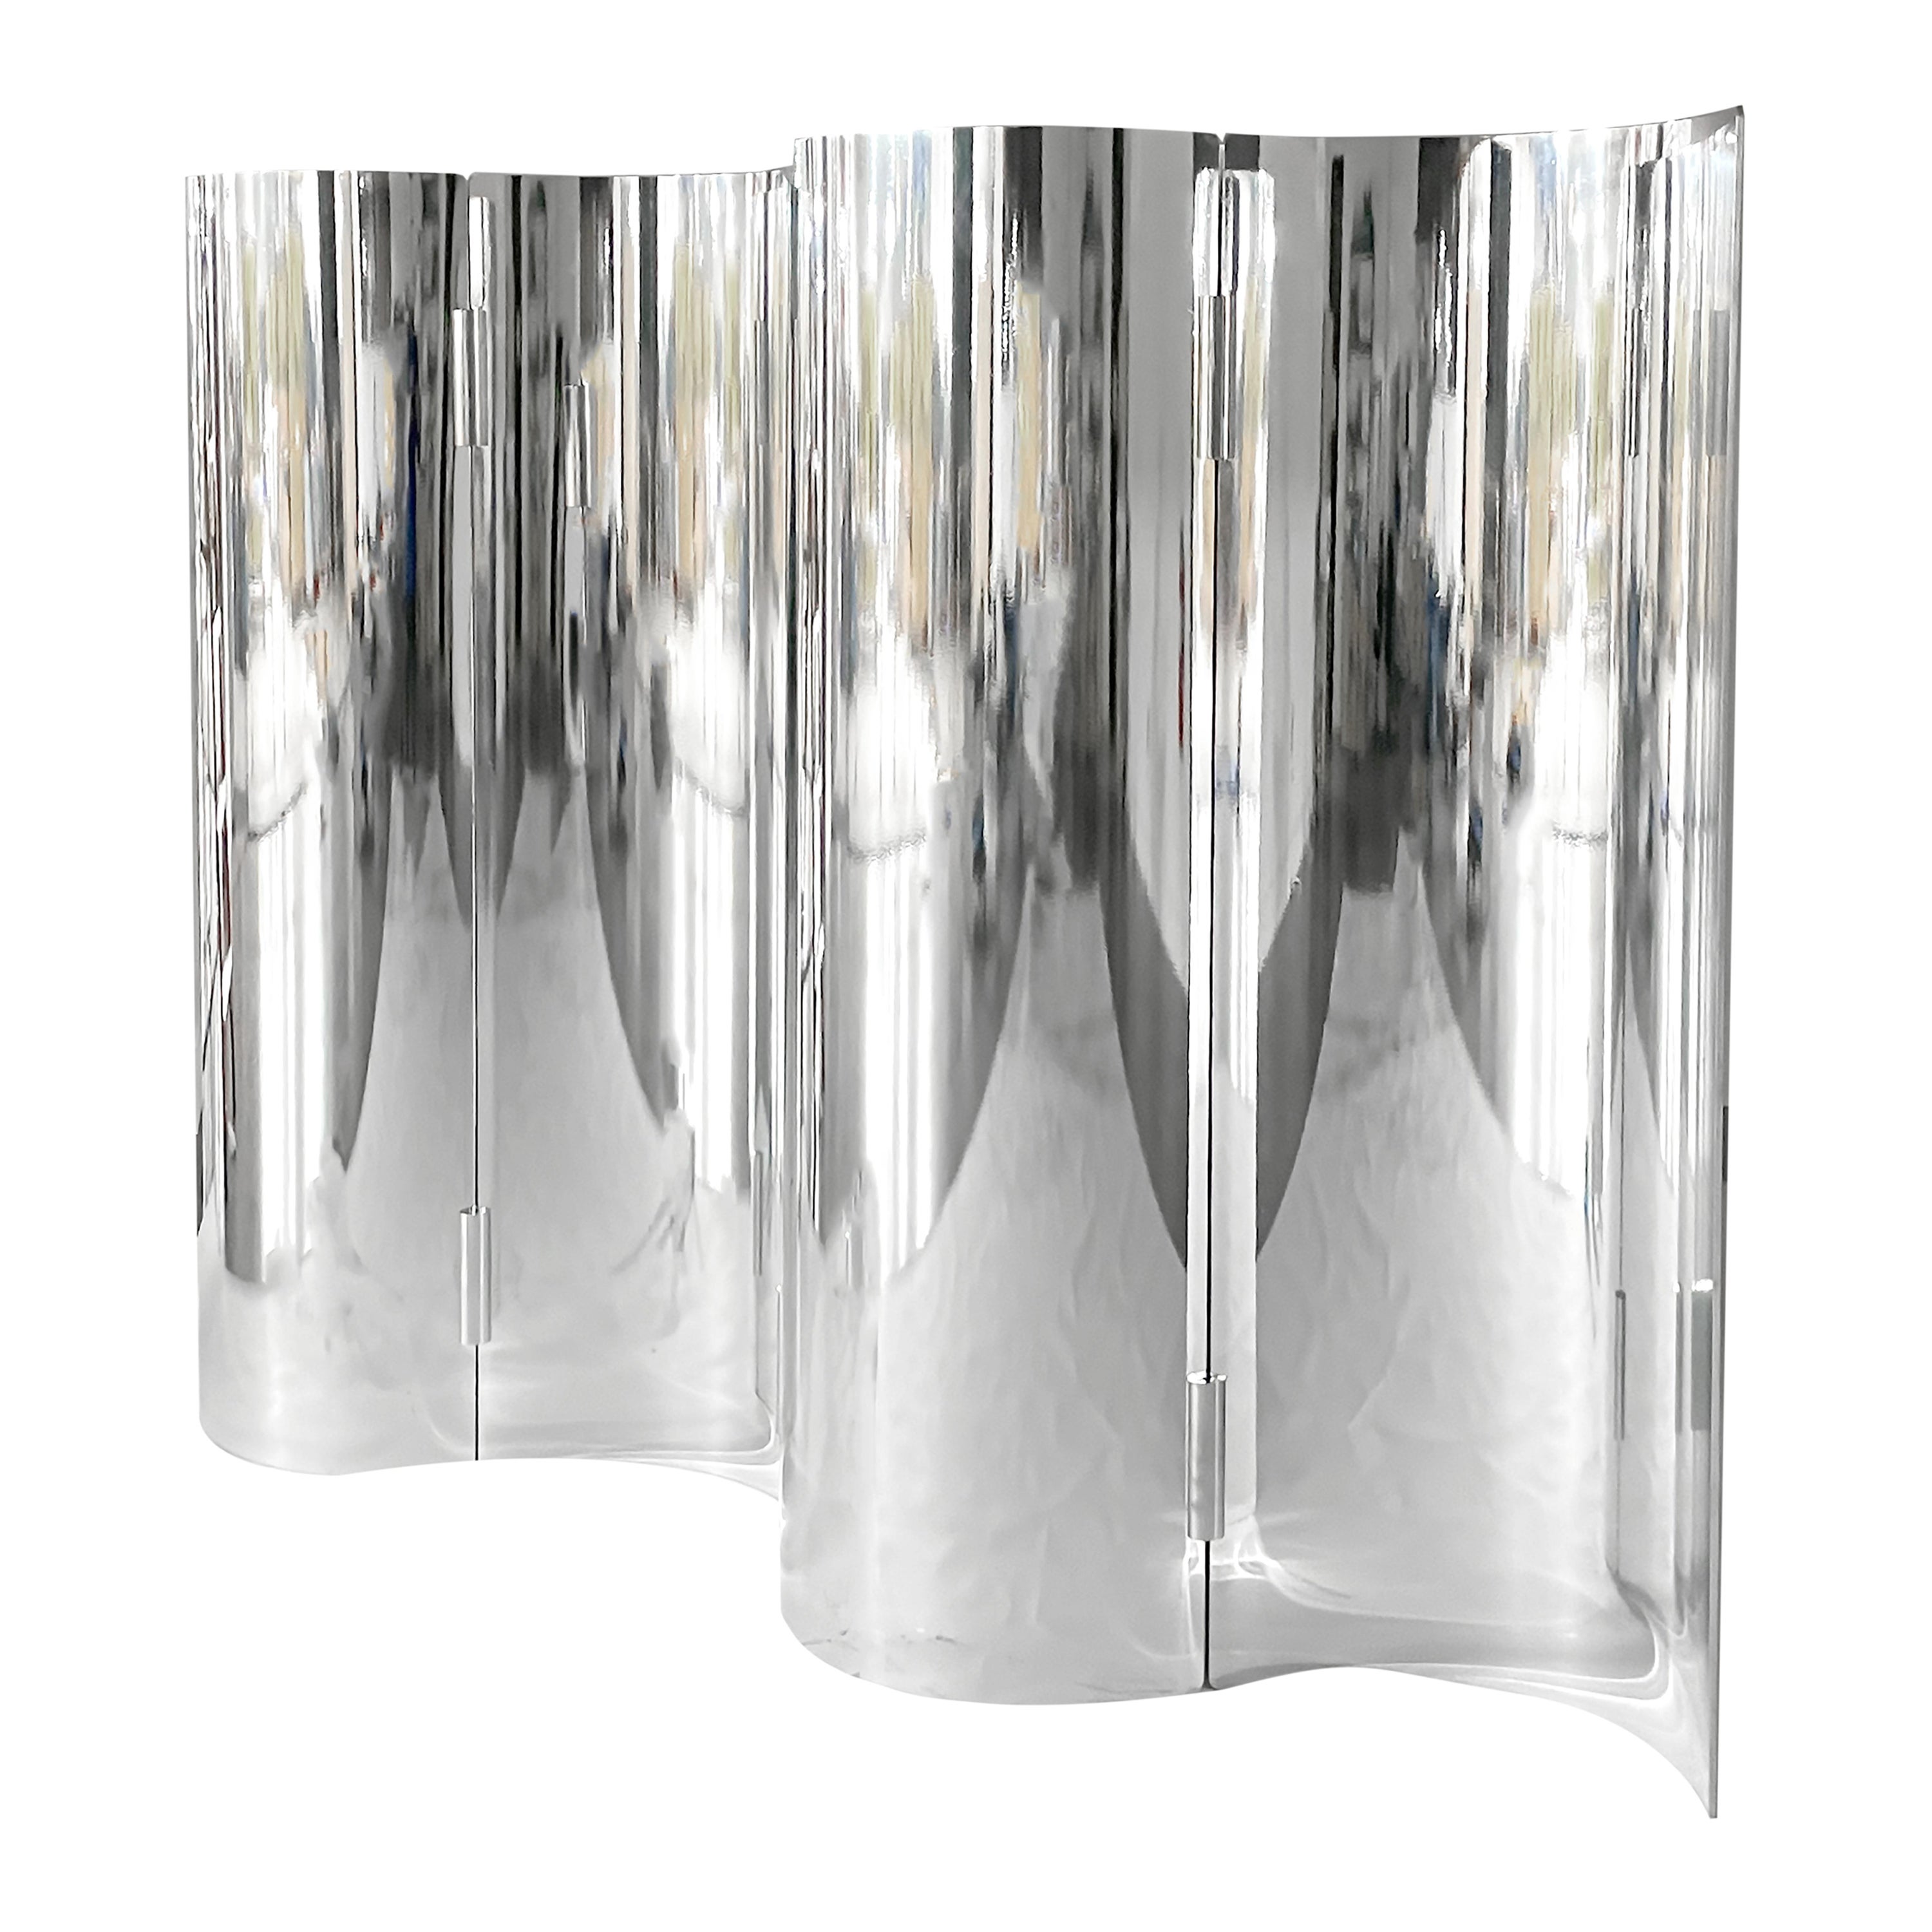 Chic Mirror-Polished or Powder-Coated Aluminum Room Divider or Screen